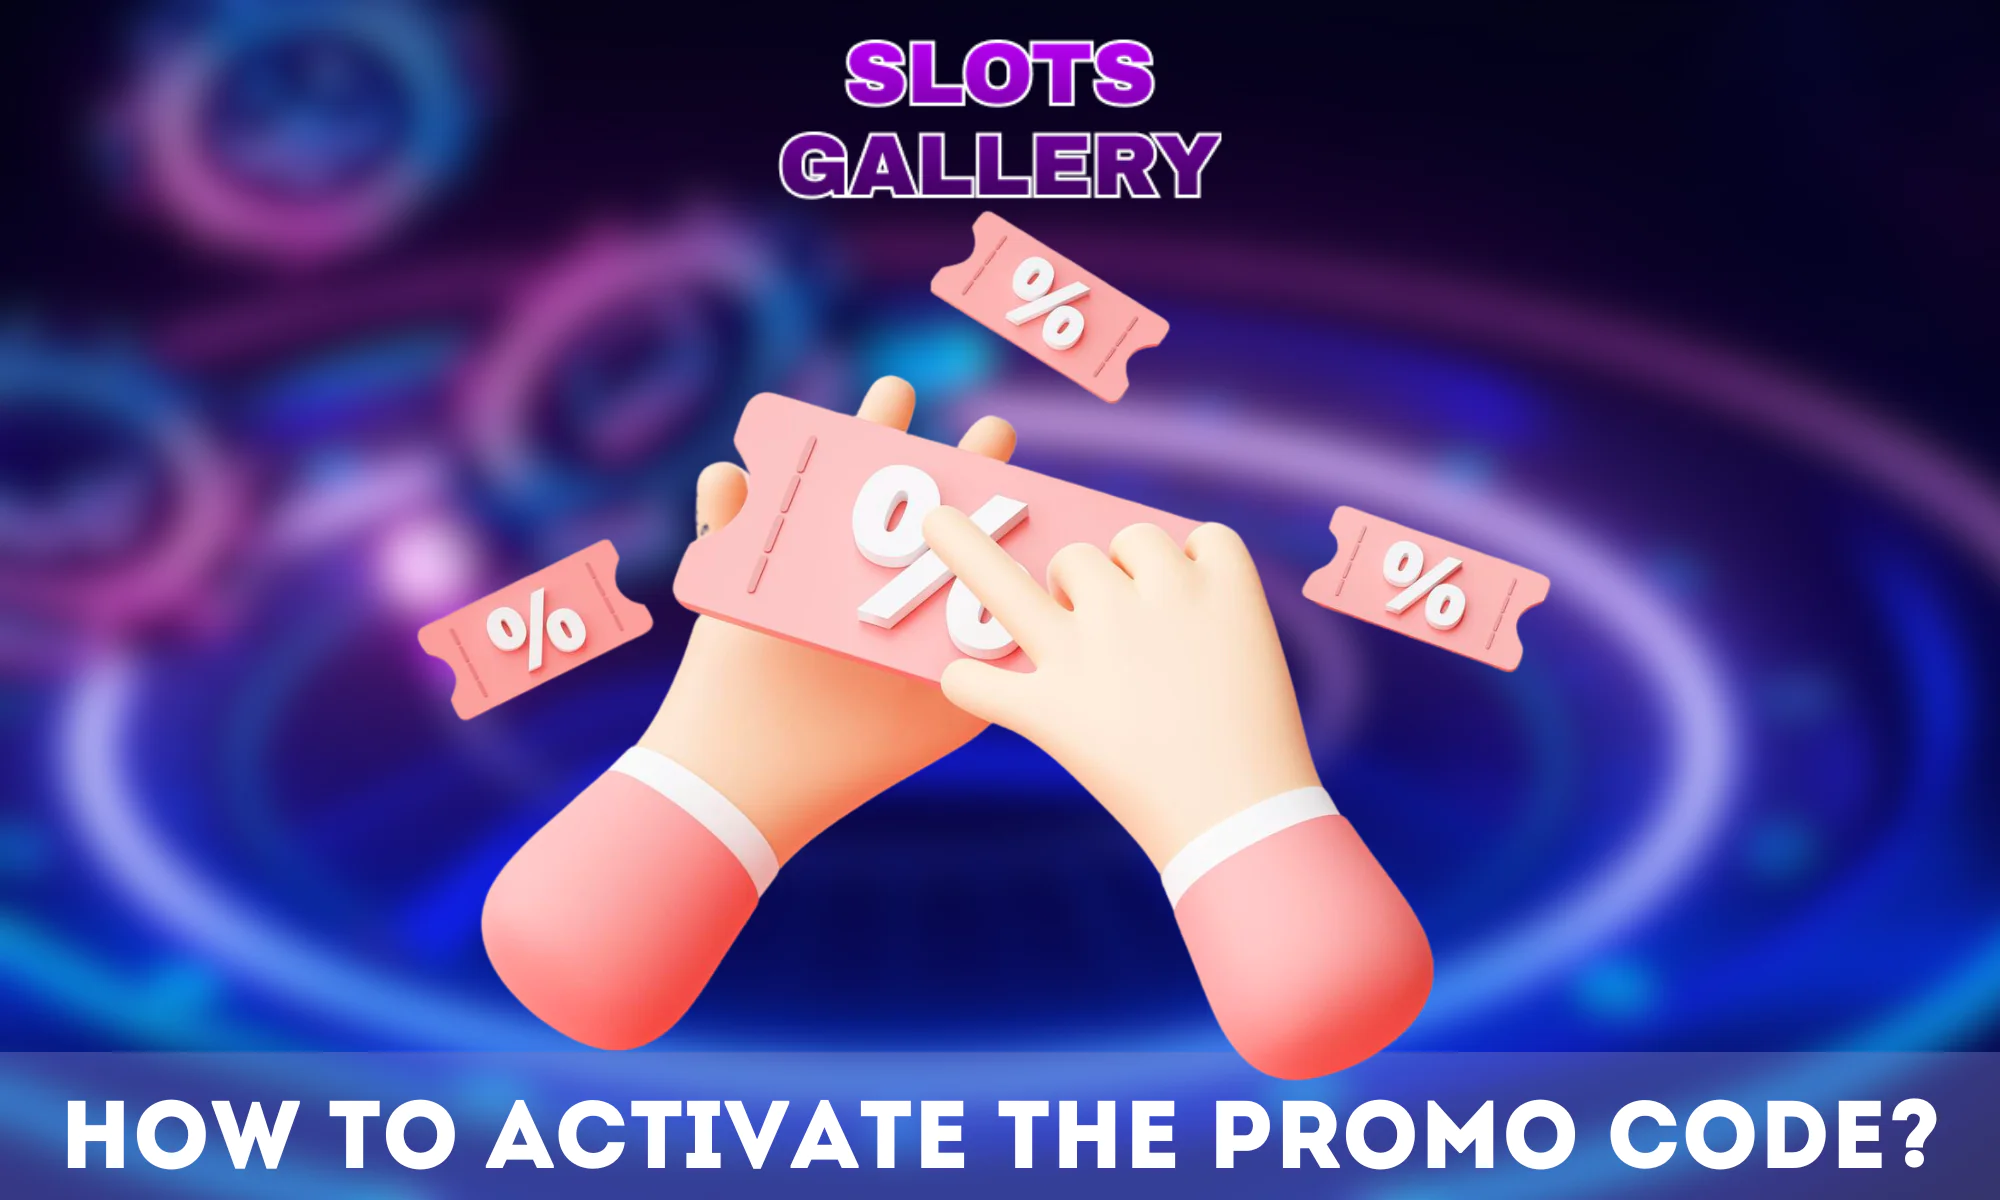 Step-by-step instructions for activating a promo code at Slots Gallery